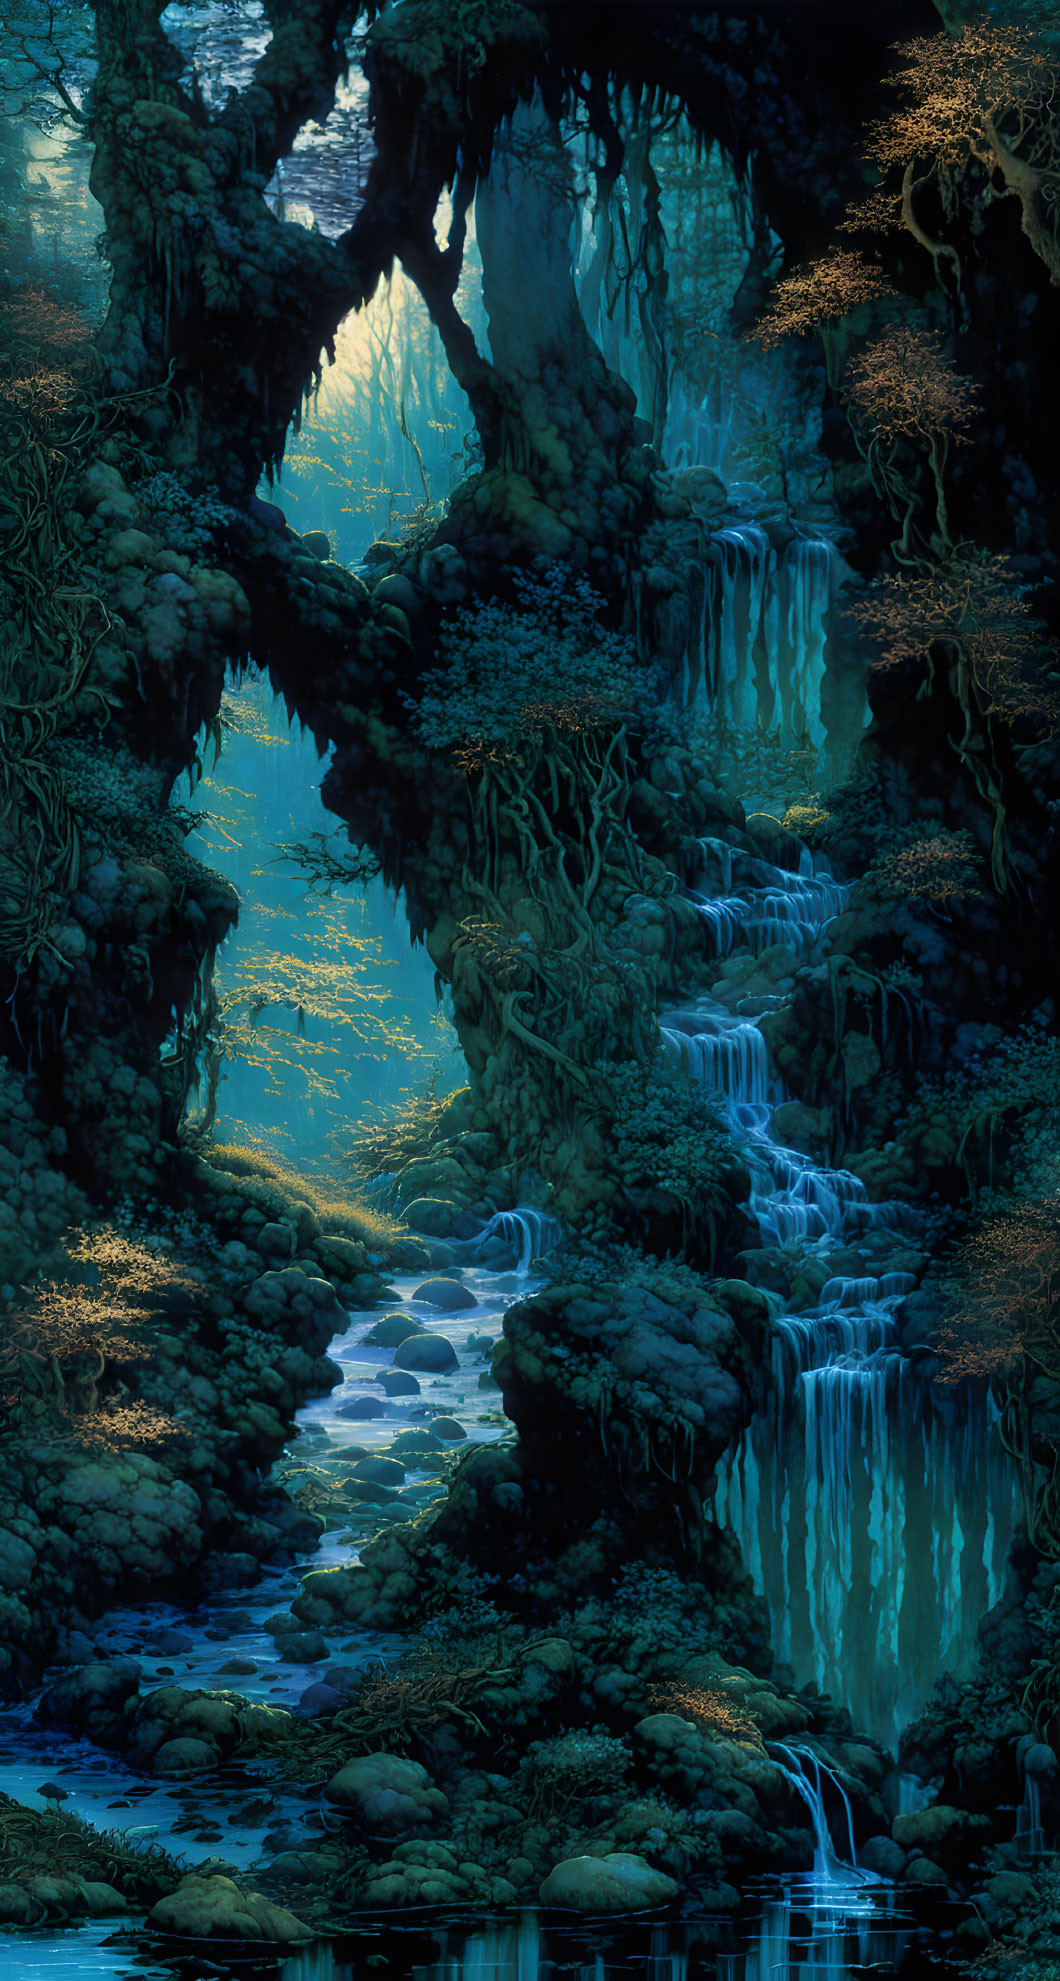 Enchanting forest with waterfalls, dense foliage, and blue light.